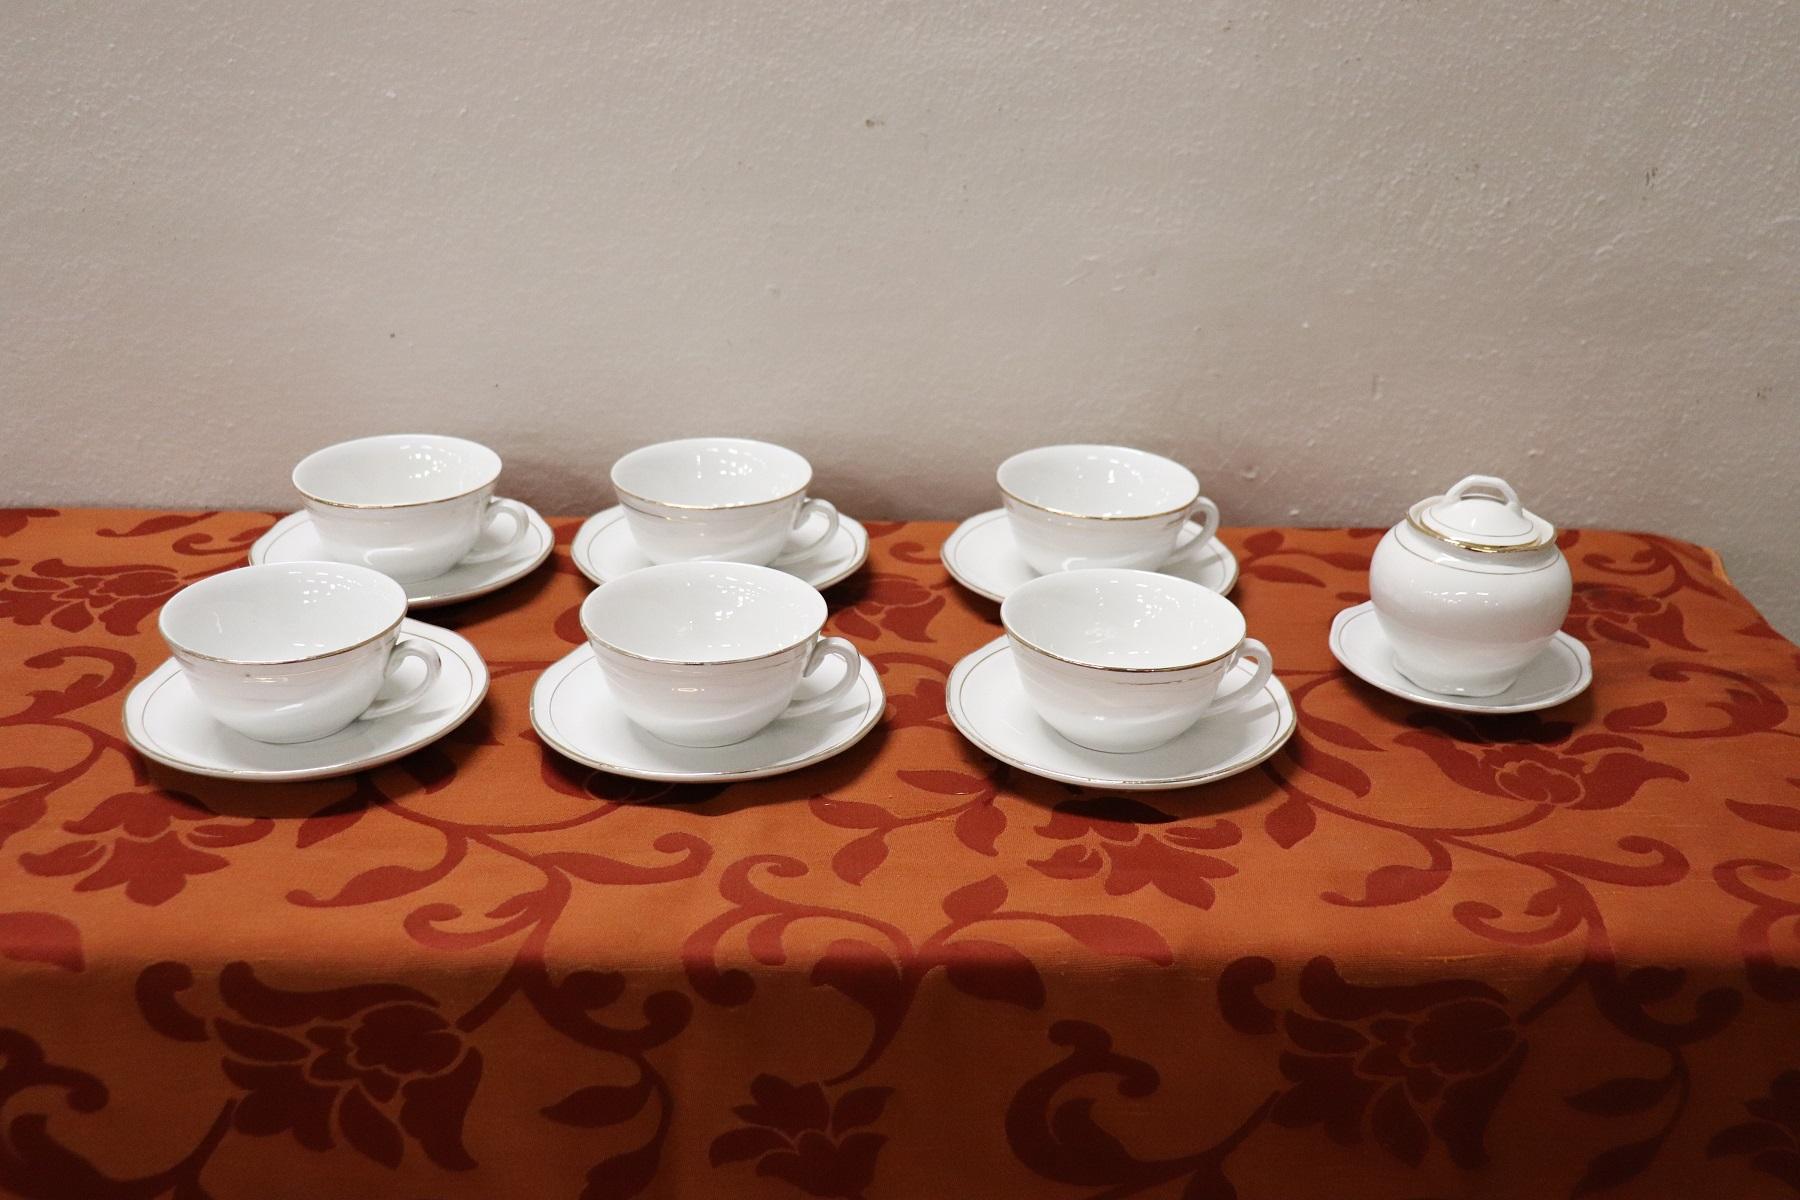 Beautiful fine white porcelain coffee set 15 pieces signed Bavaria, 1980s. The service is complete to serve six people at the table includes: 1 sugar bowl, six cups with saucers for coffee or tea. Refined decoration with gold borde. High quality